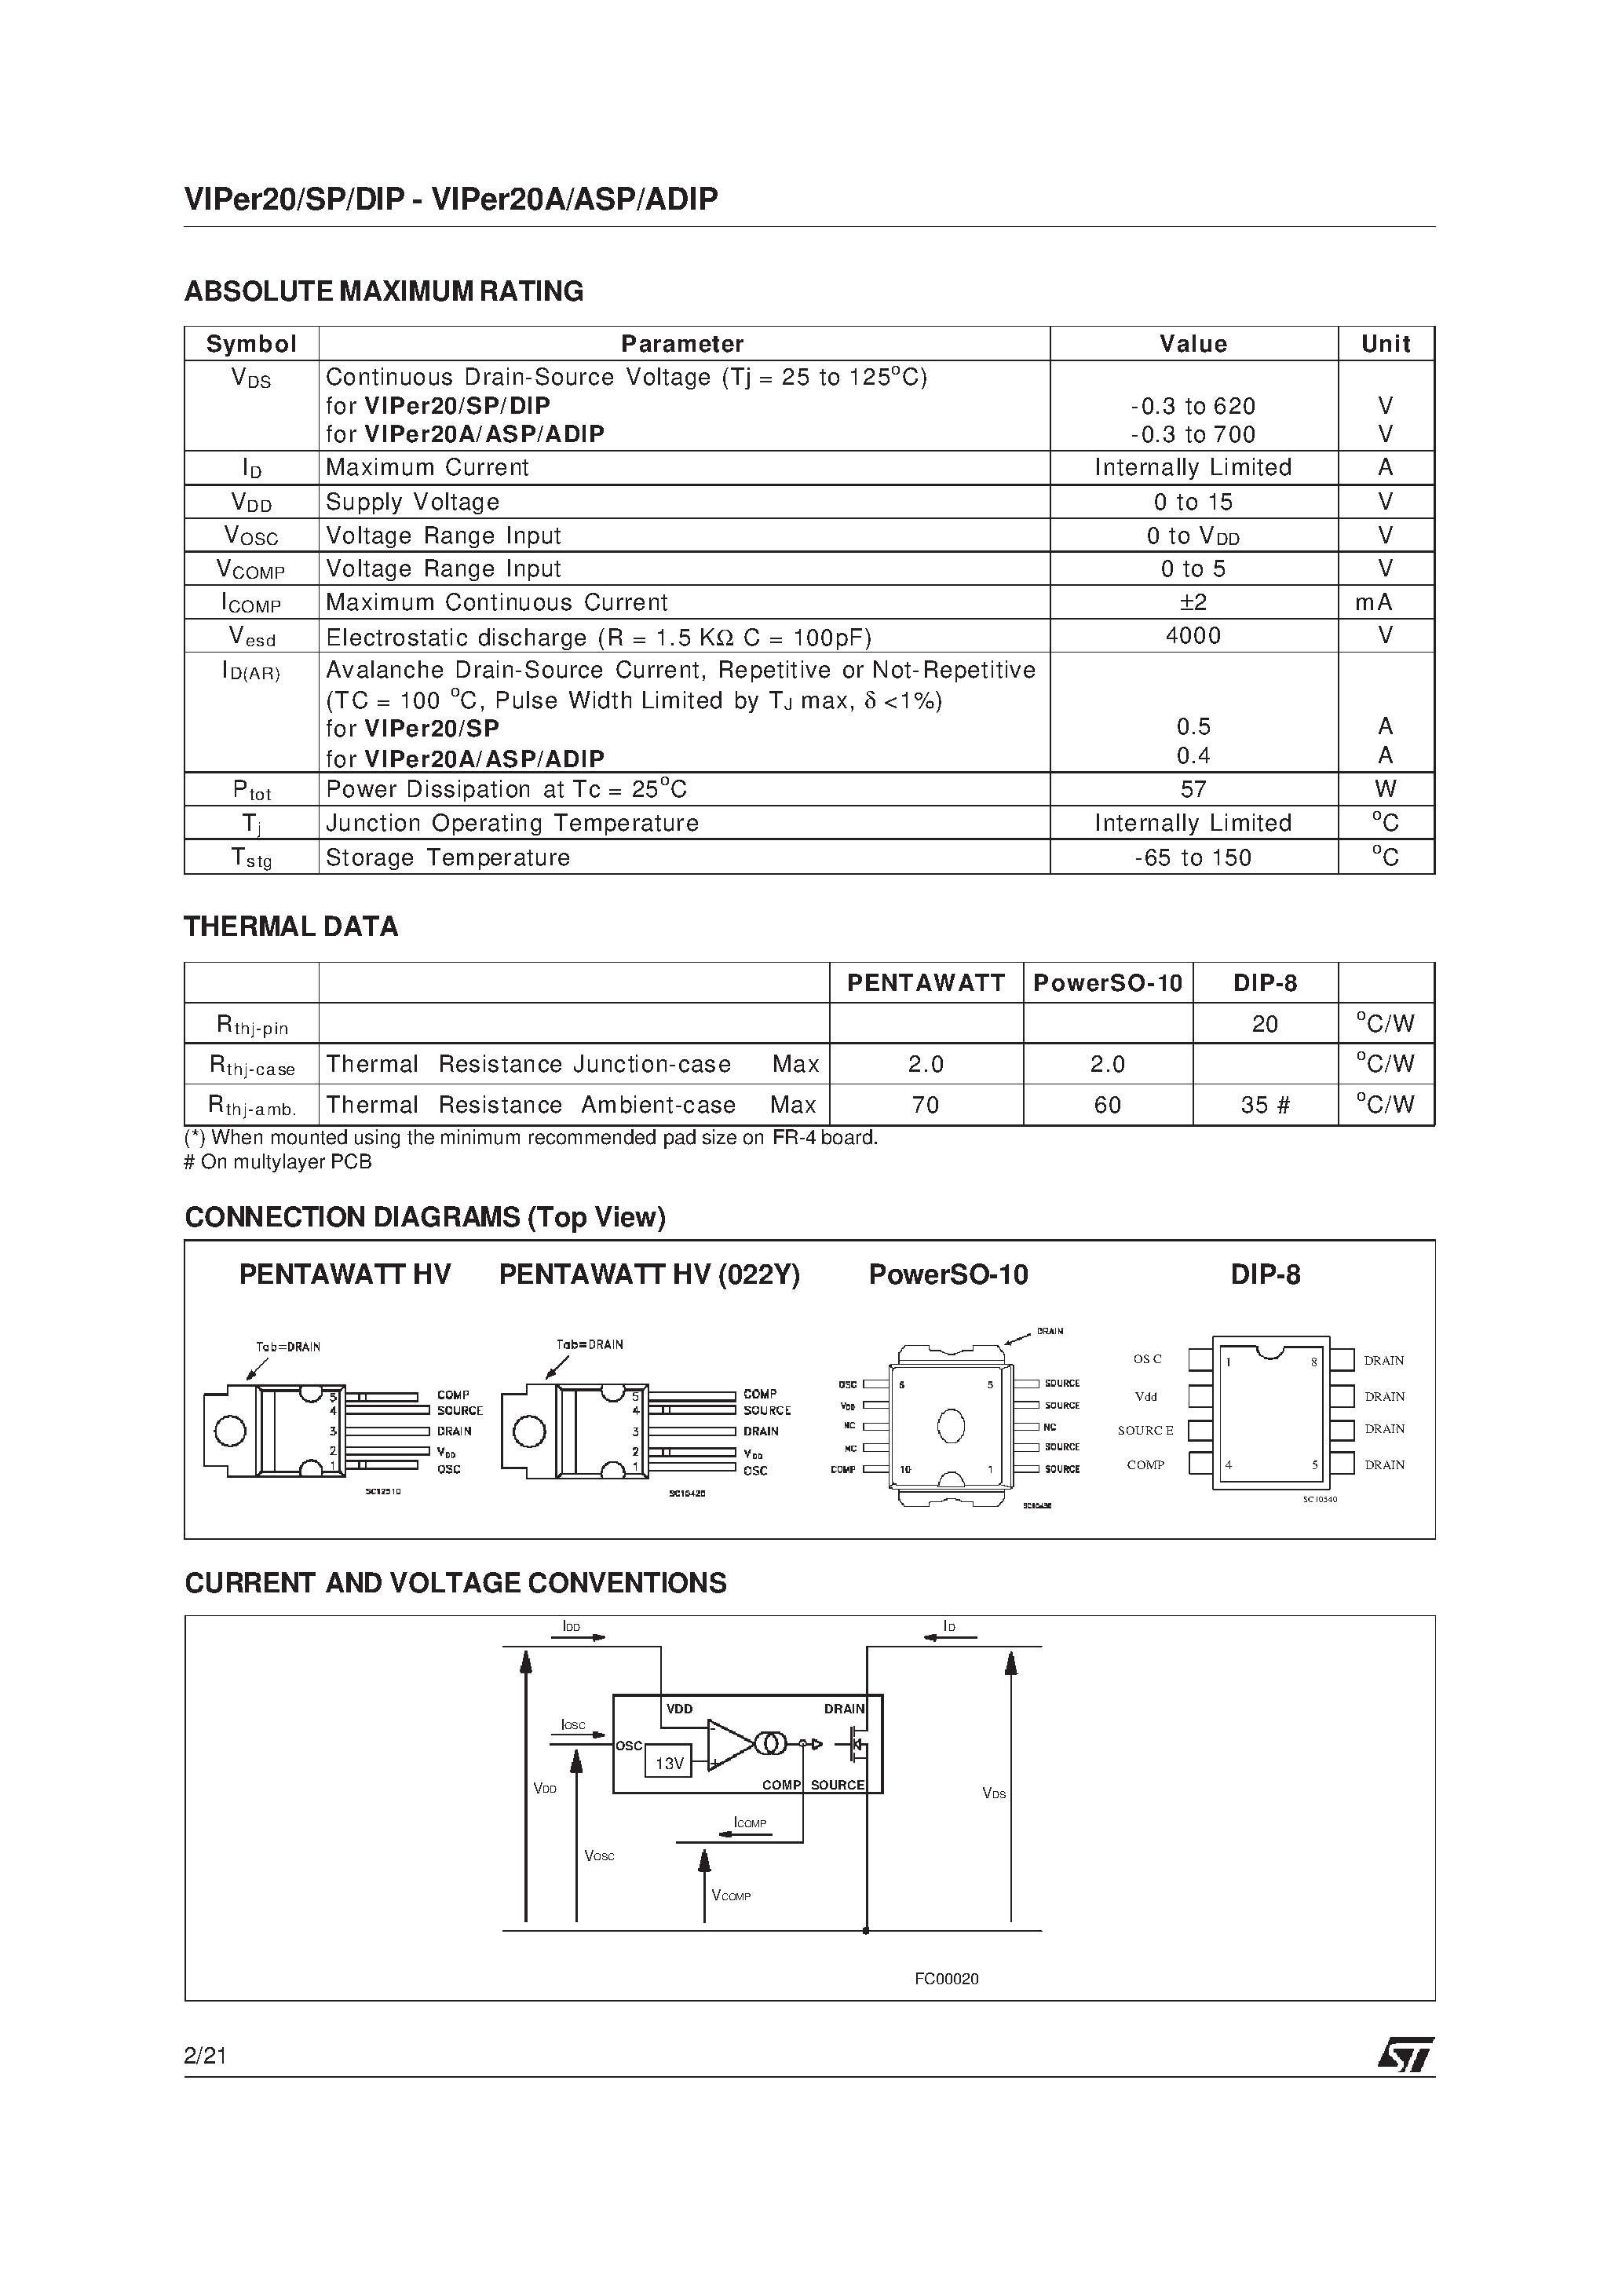 Datasheet VIPer20SP - SMPS PRIMARY I.C. page 2